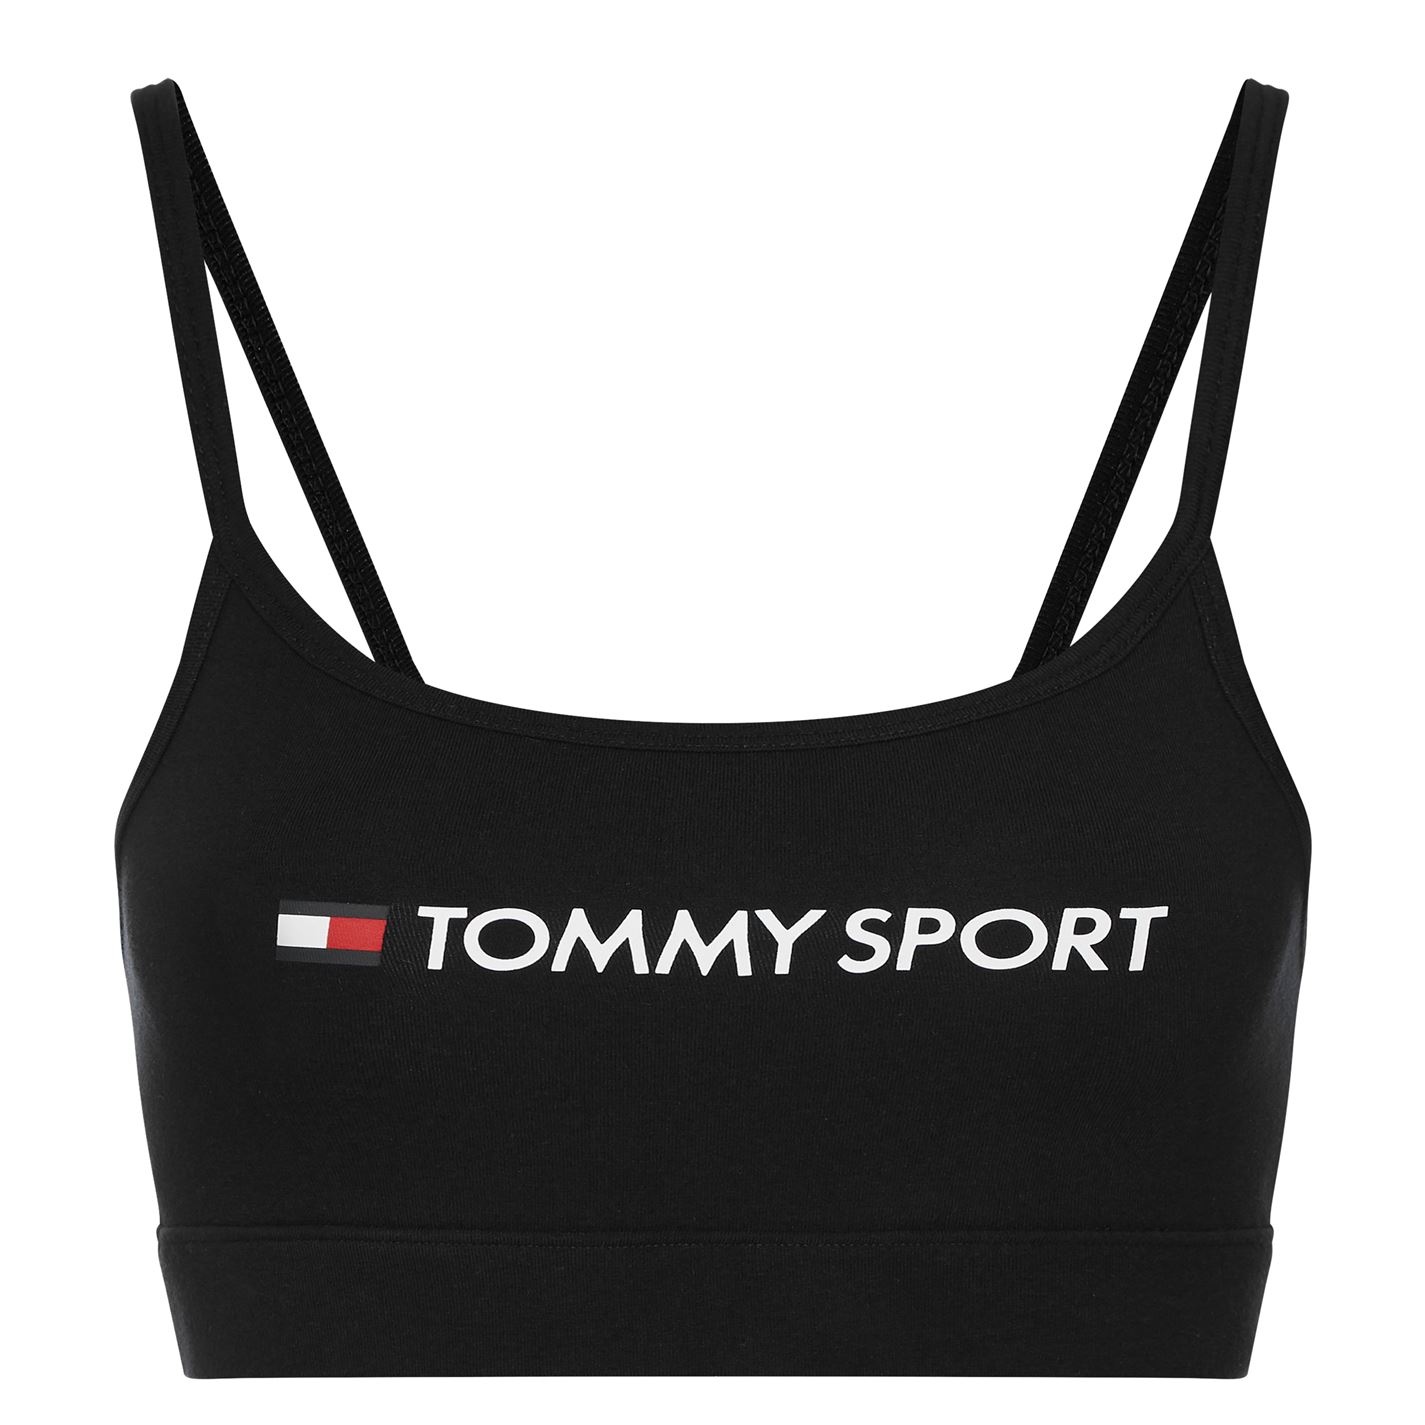 Low support. Tommy Sport о бренде. Tommy Sport мат. @Tommy_supports_rezerv. Томми спорт что за бренд.